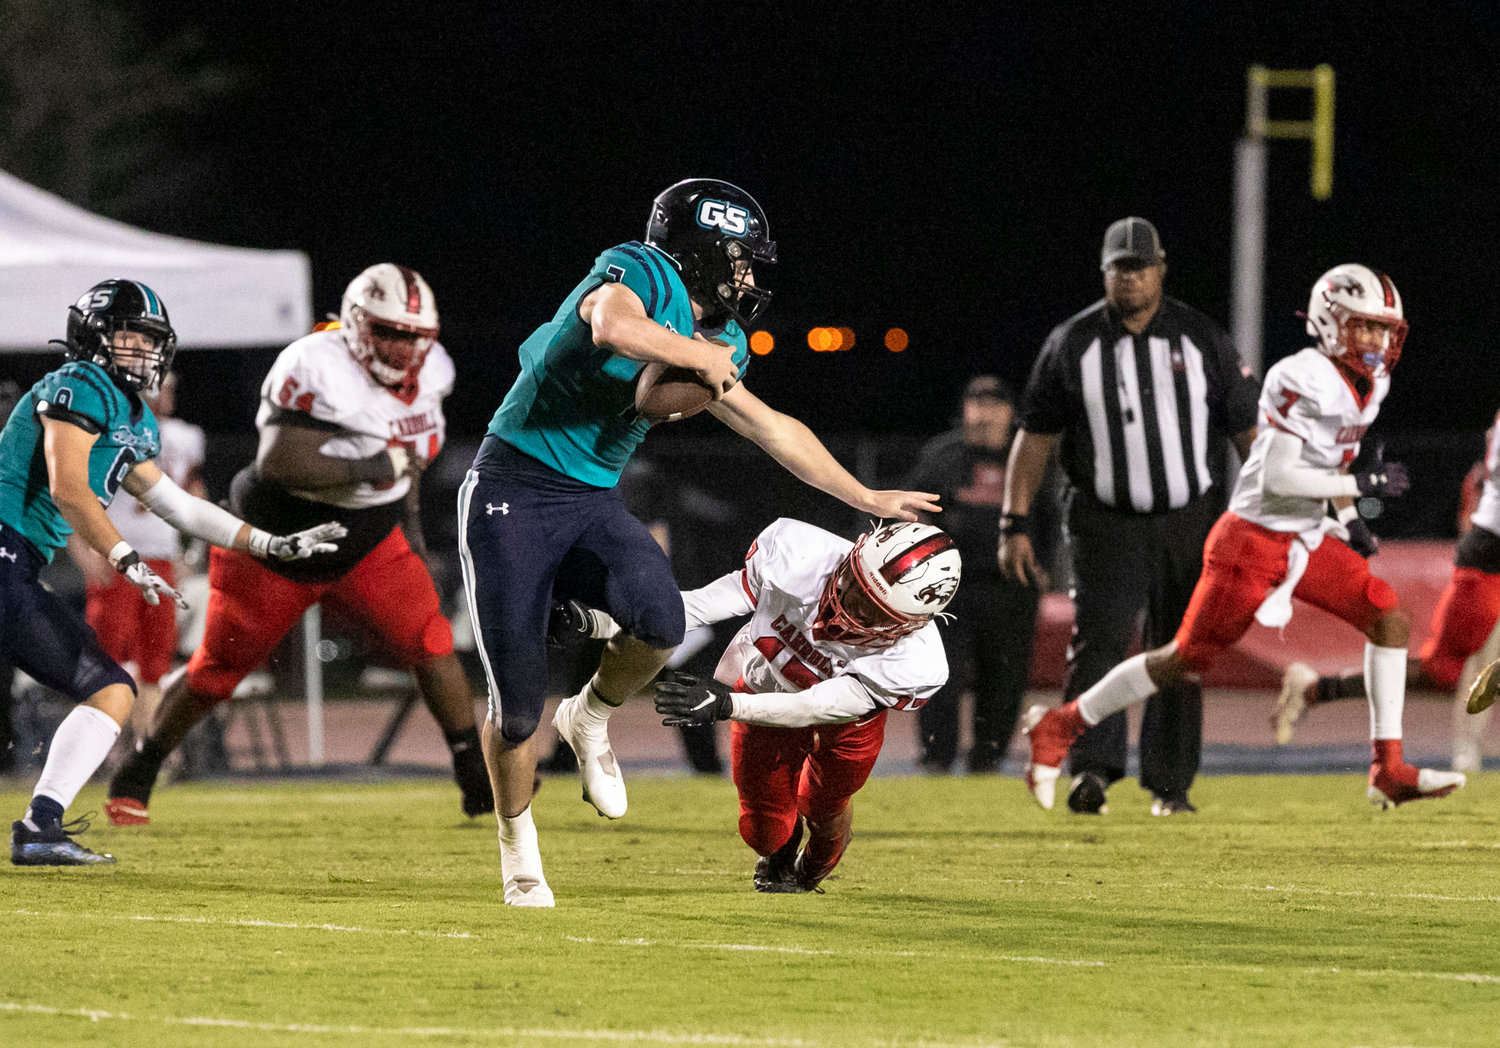 Gulf Shores quarterback Brendon Byrd delivers a stiff arm to a Carroll Eagle defender on a second-quarter scramble during the Dolphins’ first-round playoff game at home Friday night. Byrd ran for a touchdown and threw two touchdowns to help Gulf Shores win its first-ever home playoff game 42-0.